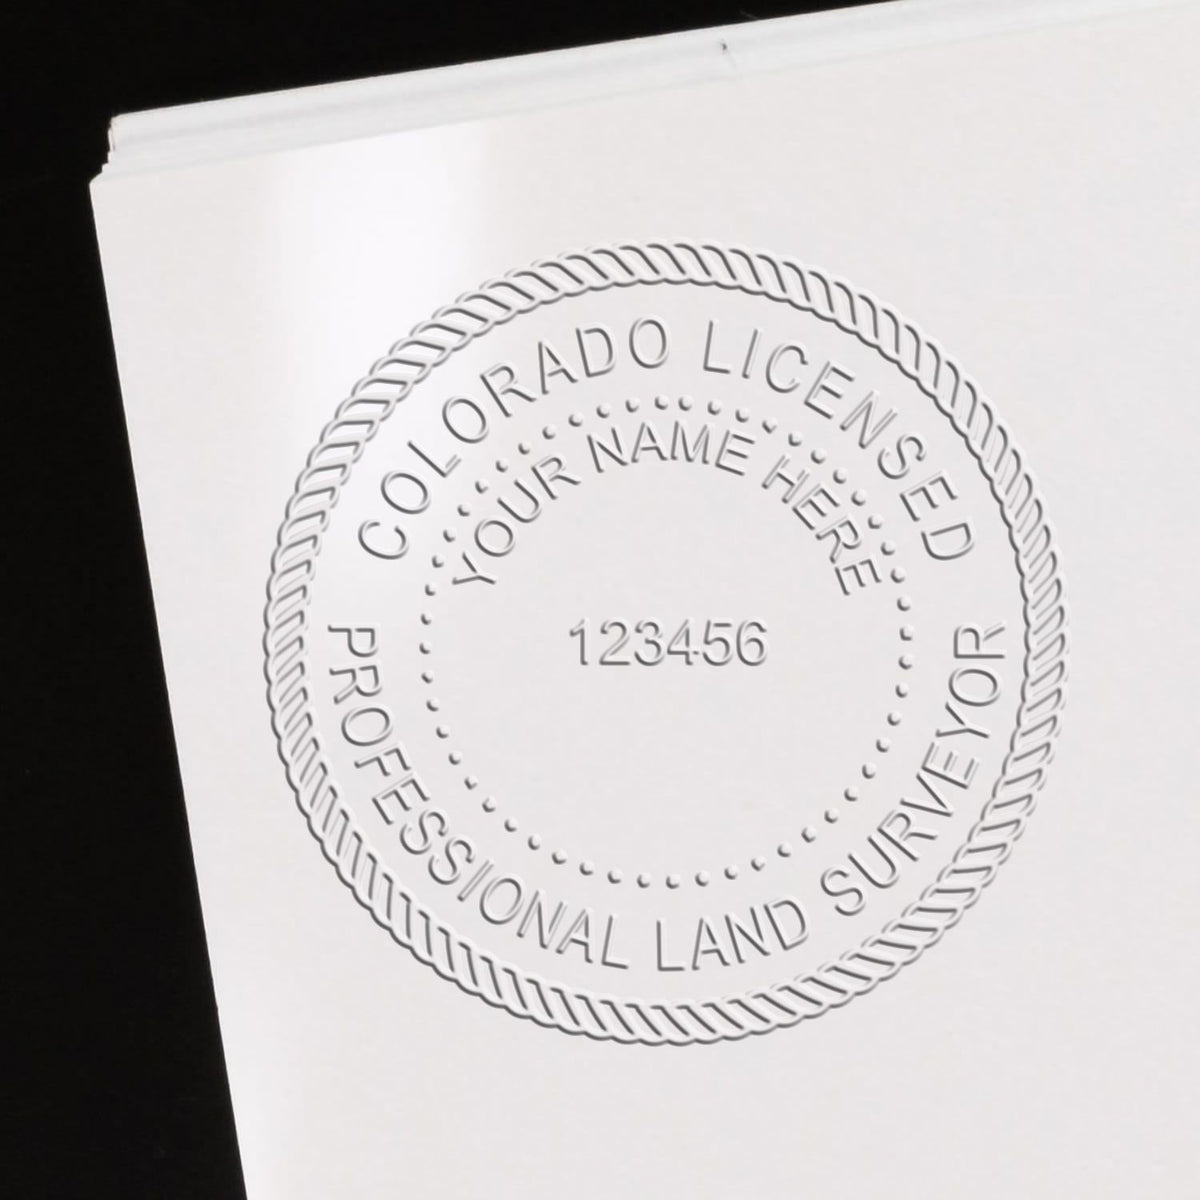 A stamped impression of the Handheld Colorado Land Surveyor Seal in this stylish lifestyle photo, setting the tone for a unique and personalized product.